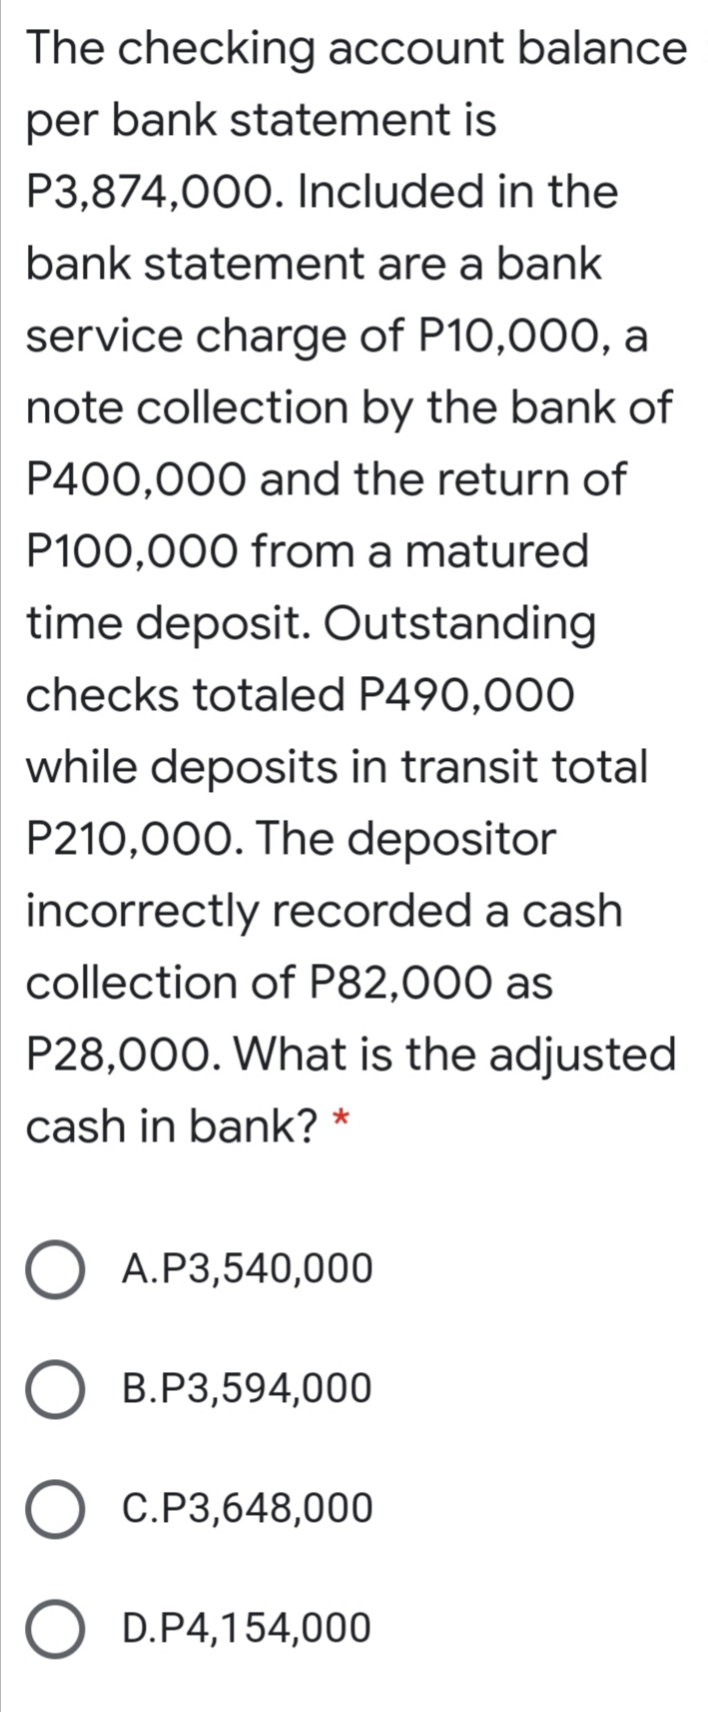 The checking account balance
per bank statement is
P3,874,000. Included in the
bank statement are a bank
service charge of P10,000, a
note collection by the bank of
P400,000 and the return of
P100,000 from a matured
time deposit. Outstanding
checks totaled P490,000
while deposits in transit total
P210,000. The depositor
incorrectly recorded a cash
collection of P82,000 as
P28,000. What is the adjusted
cash in bank? *
A.P3,540,000
B.P3,594,000
C.P3,648,000
D.P4,154,000
